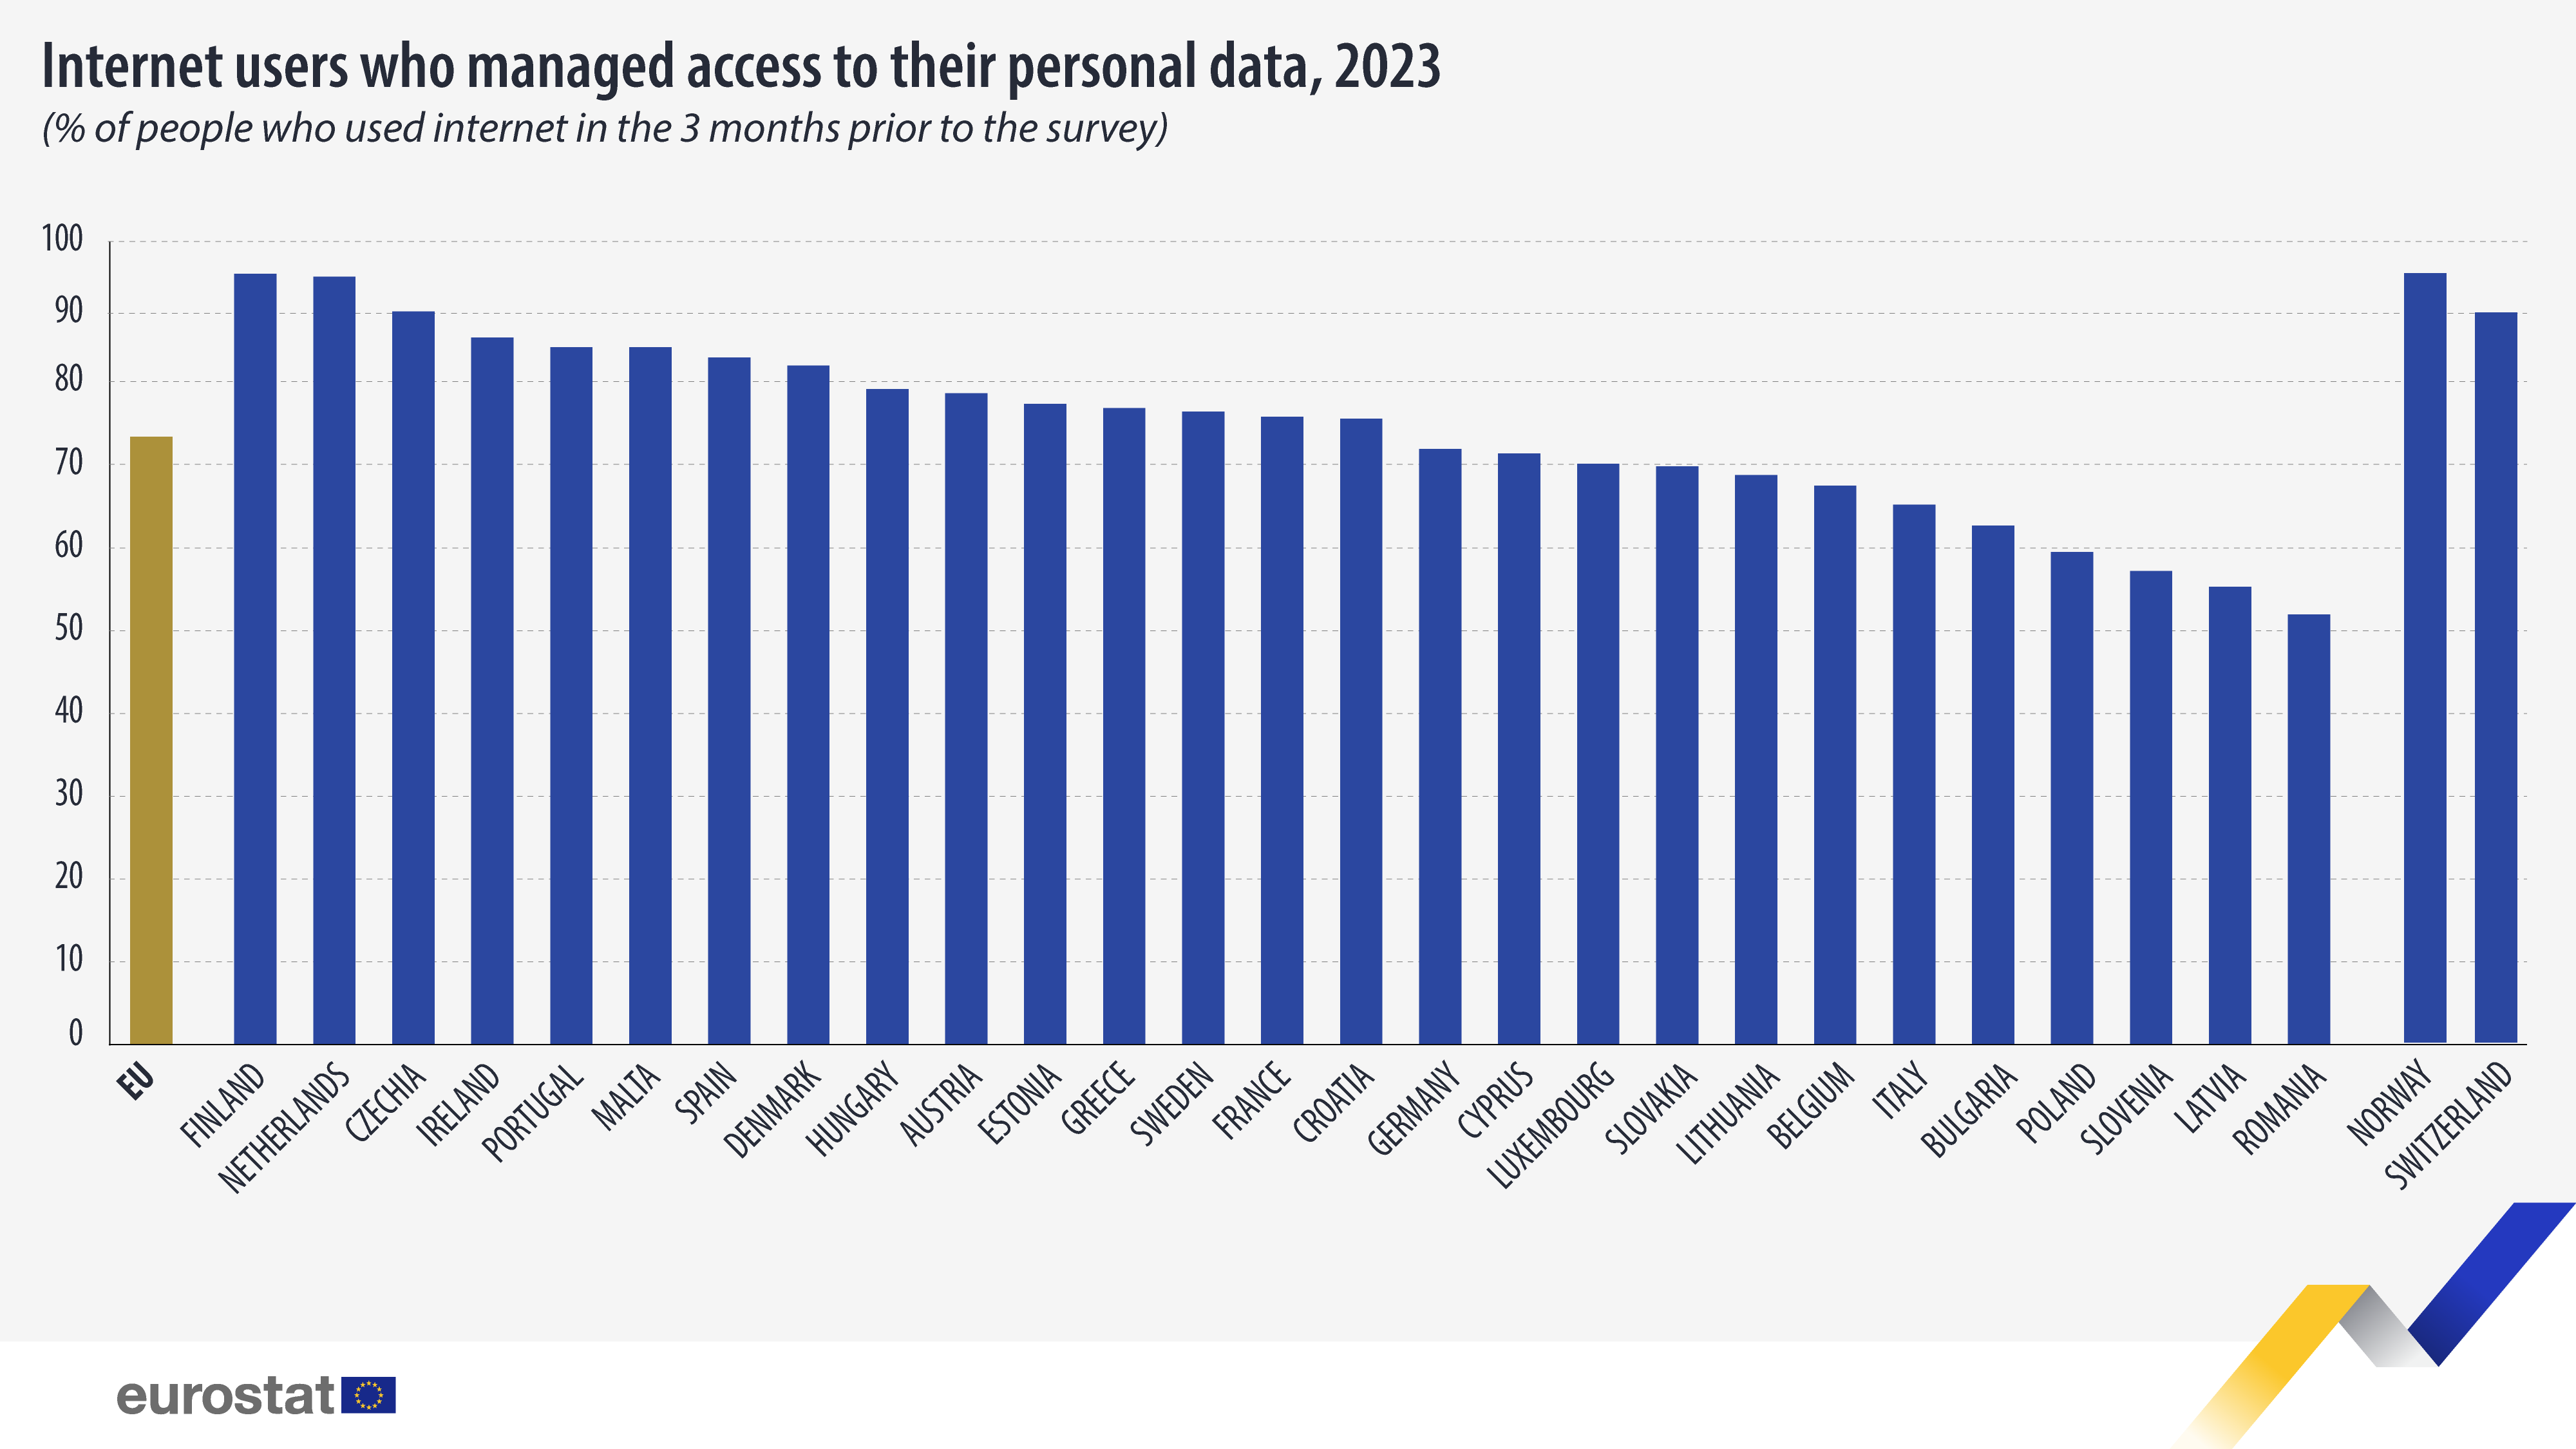 Internet users who managed access to their personal data, % of people who used internet in the 3 months prior to the survey, 2023. Chart. See link to full dataset below.